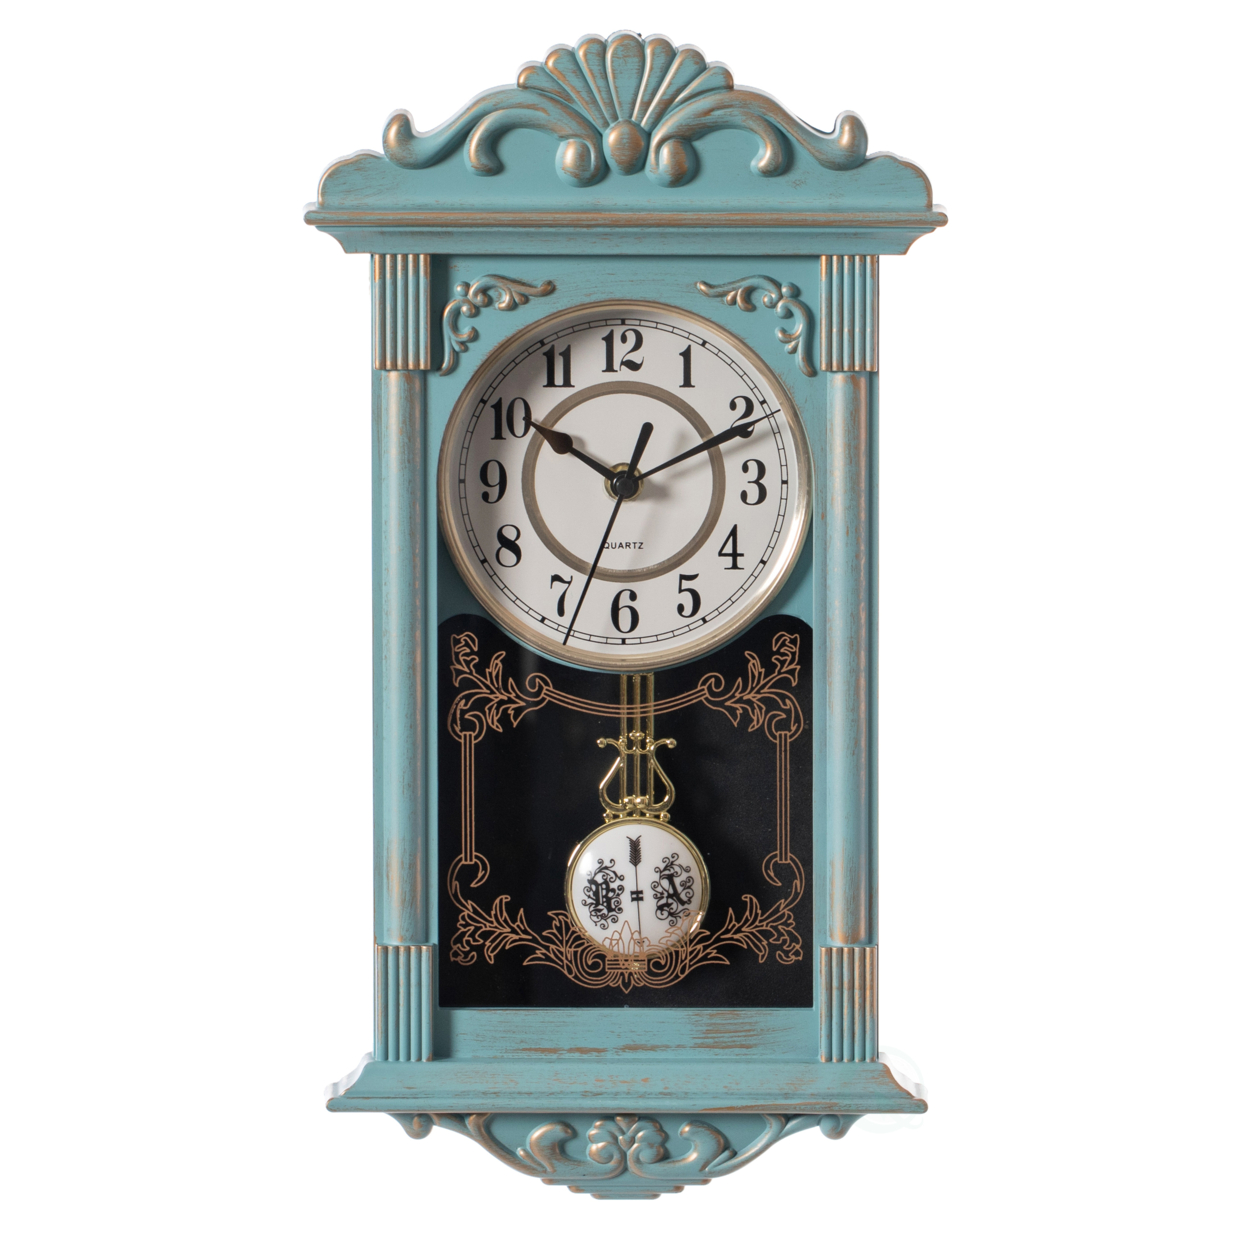 Vintage Grandfather Wood- Looking Plastic Pendulum Wall Clock For Living Room, Kitchen, Or Dining Room - Blue, 23.7 Inch Heigh